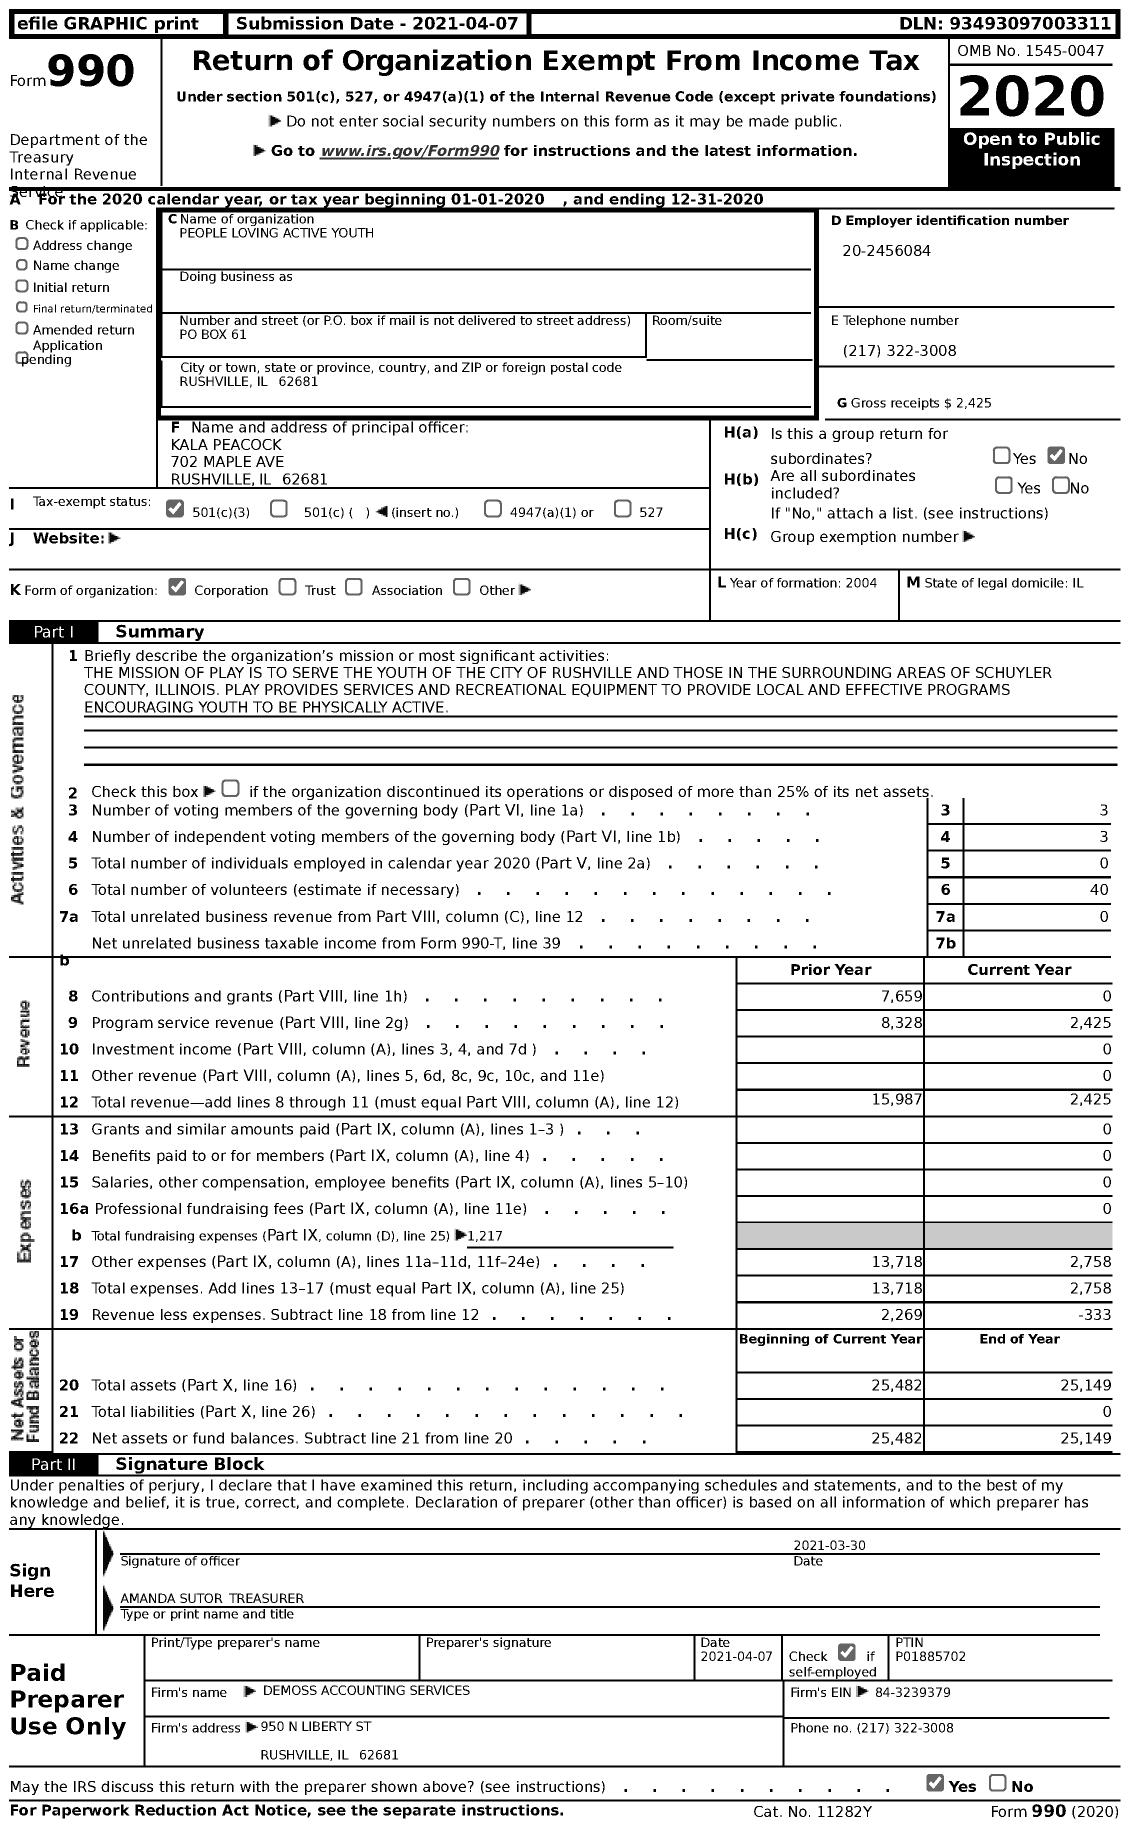 Image of first page of 2020 Form 990 for People Loving Active Youth